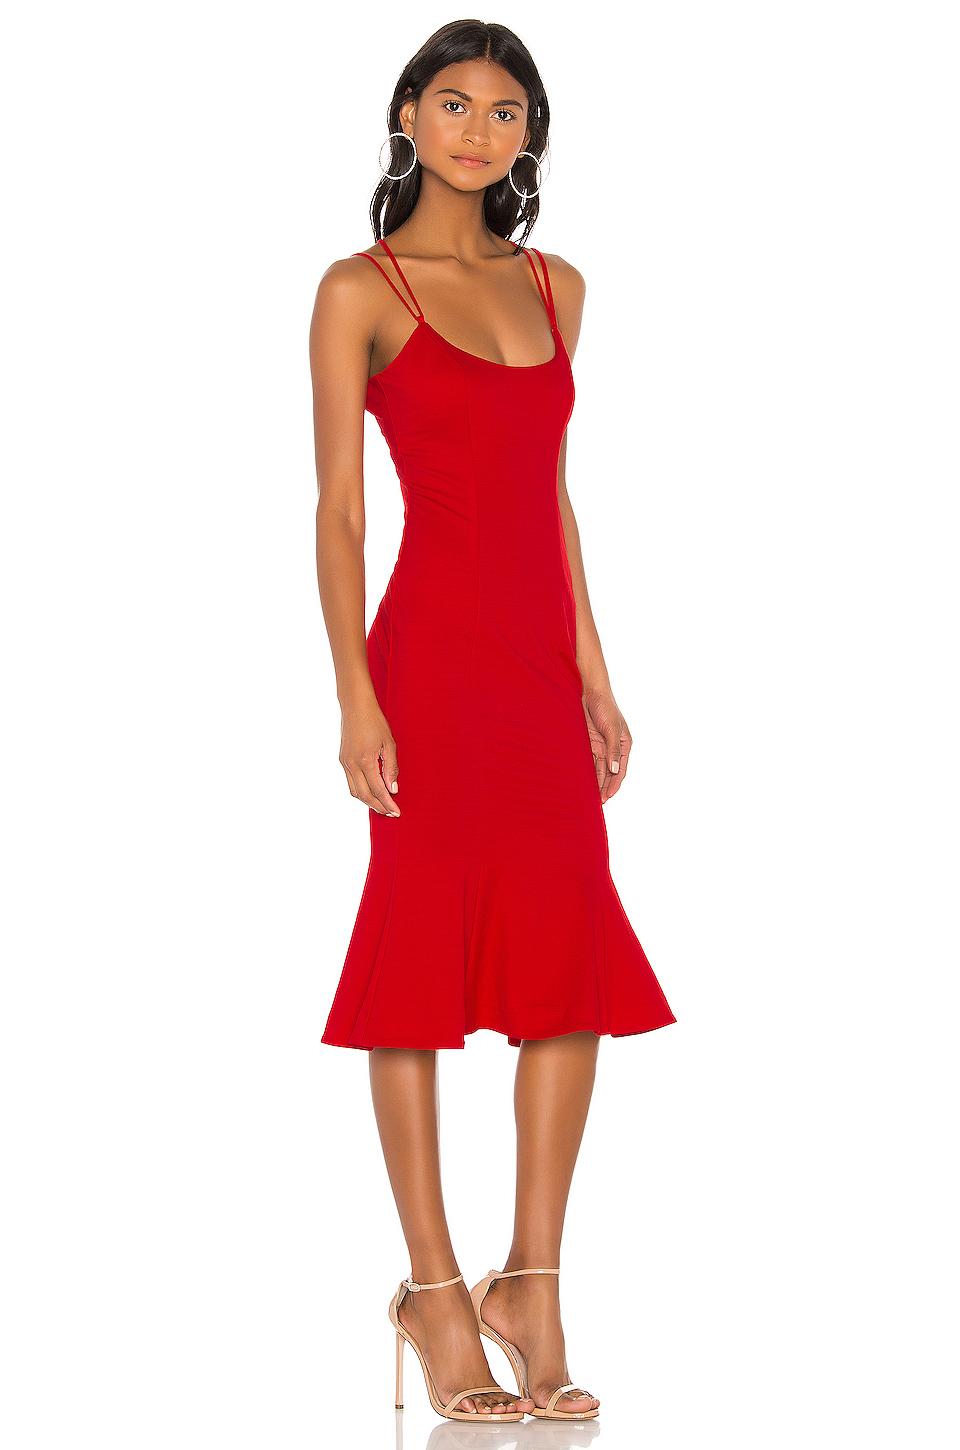 Nbd Synthetic Melody Midi Dress in Candy Red (Red) - Lyst